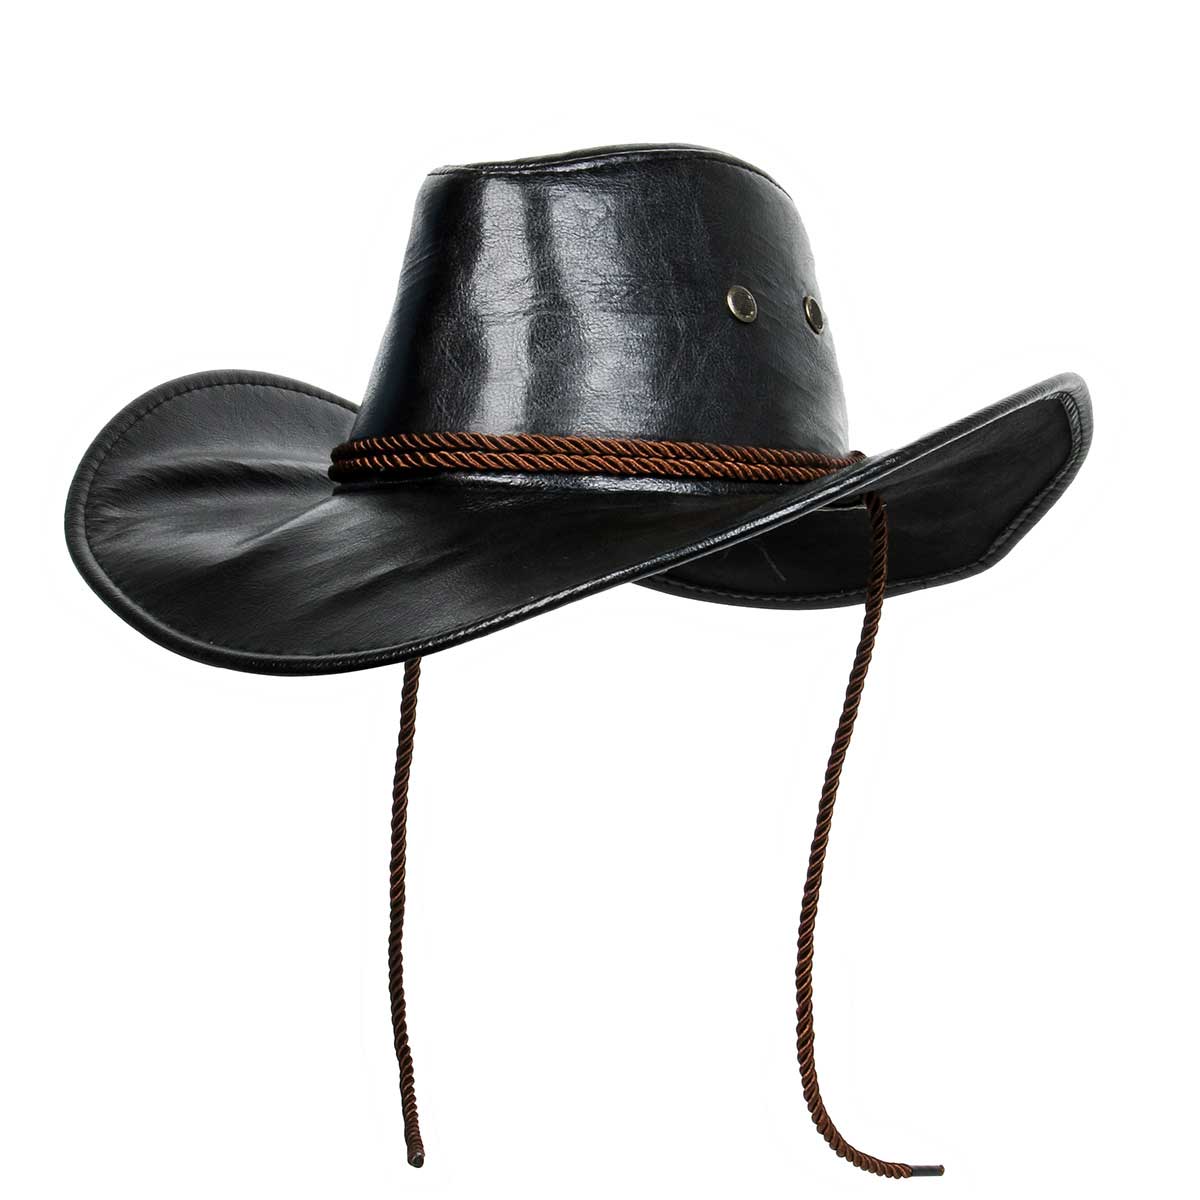 Game RDR2 Red Dead Redemption 2 Cowboy Cosplay Hat Halloween Party Props-Takerlama